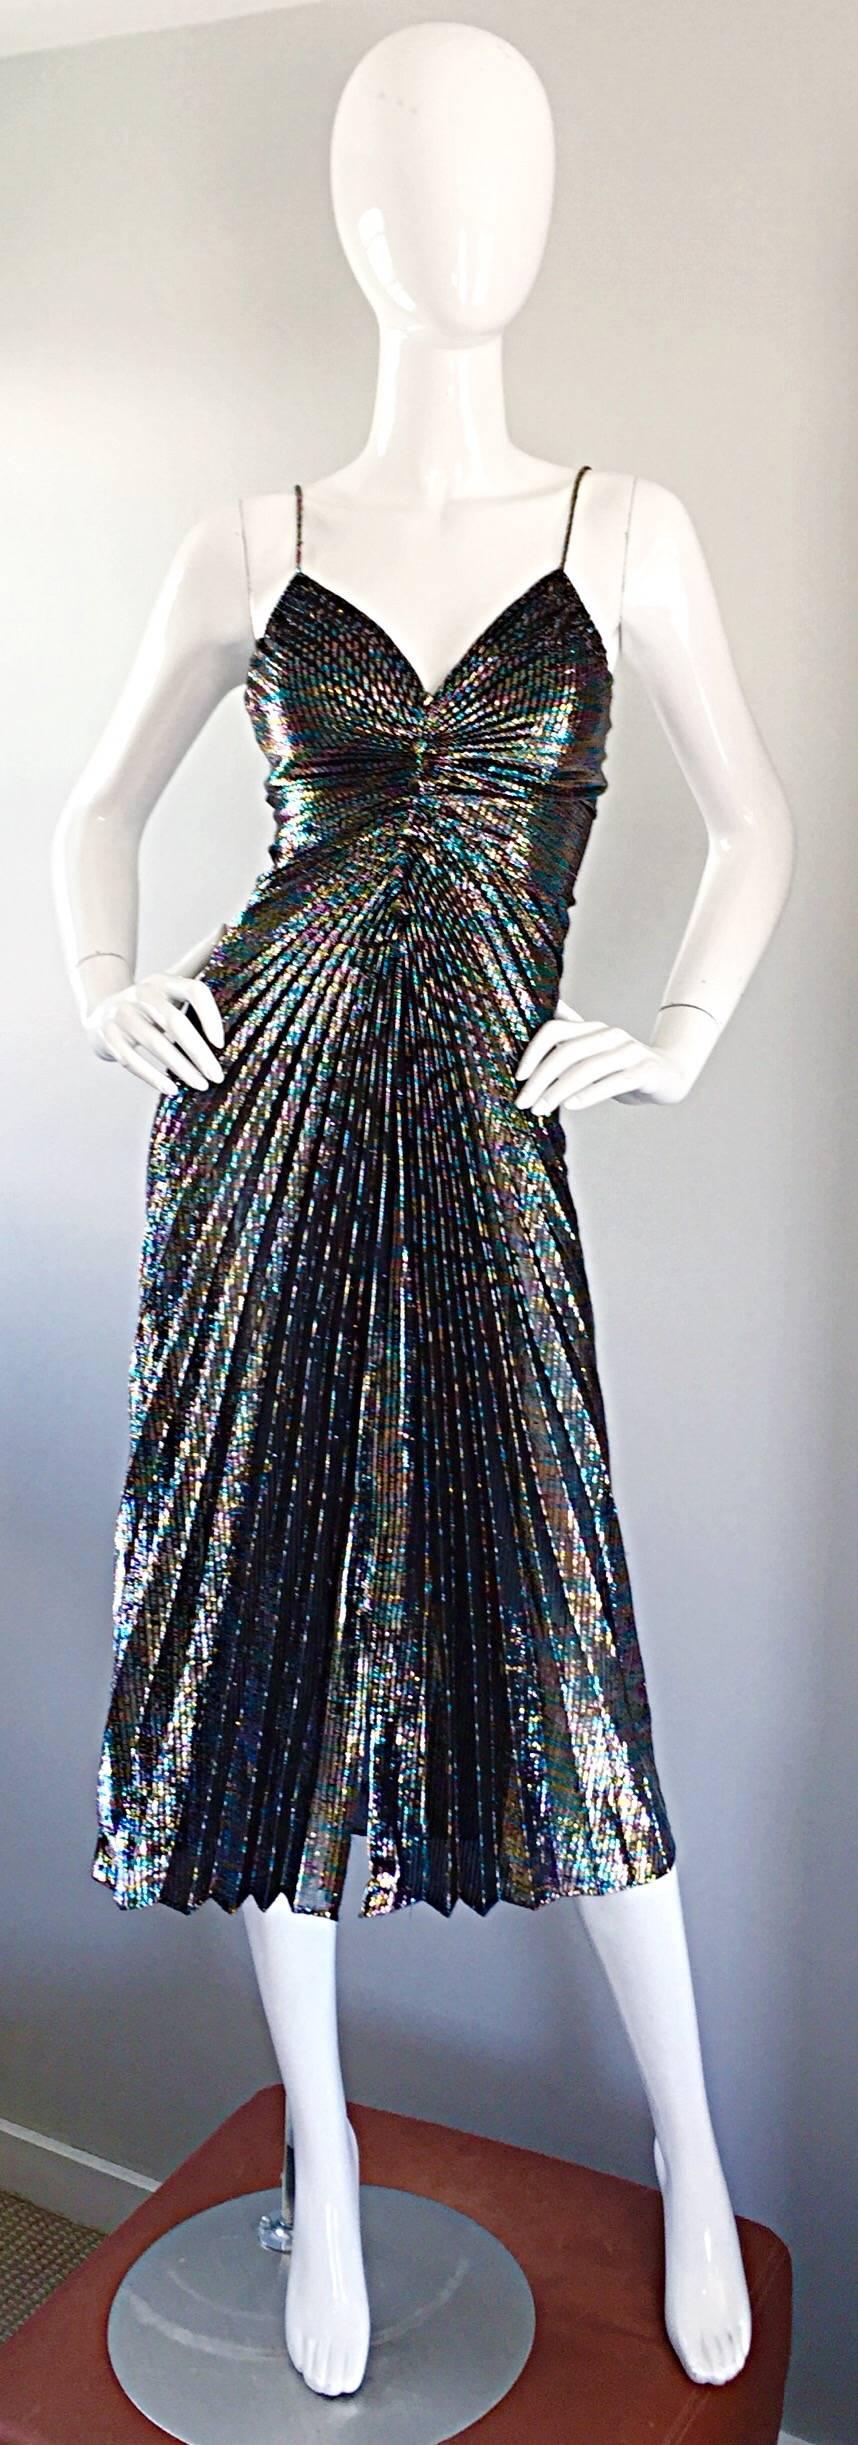 Sexy 1970s SAMIR rainbow metallic pleated dress! Super flattering fit, with a fitted pleated bodice, and flirty pleated skirt. Mock fabric covered buttons up the bodice. Hidden zipper up the back. This is the ULTIMATE party dress, and looks great